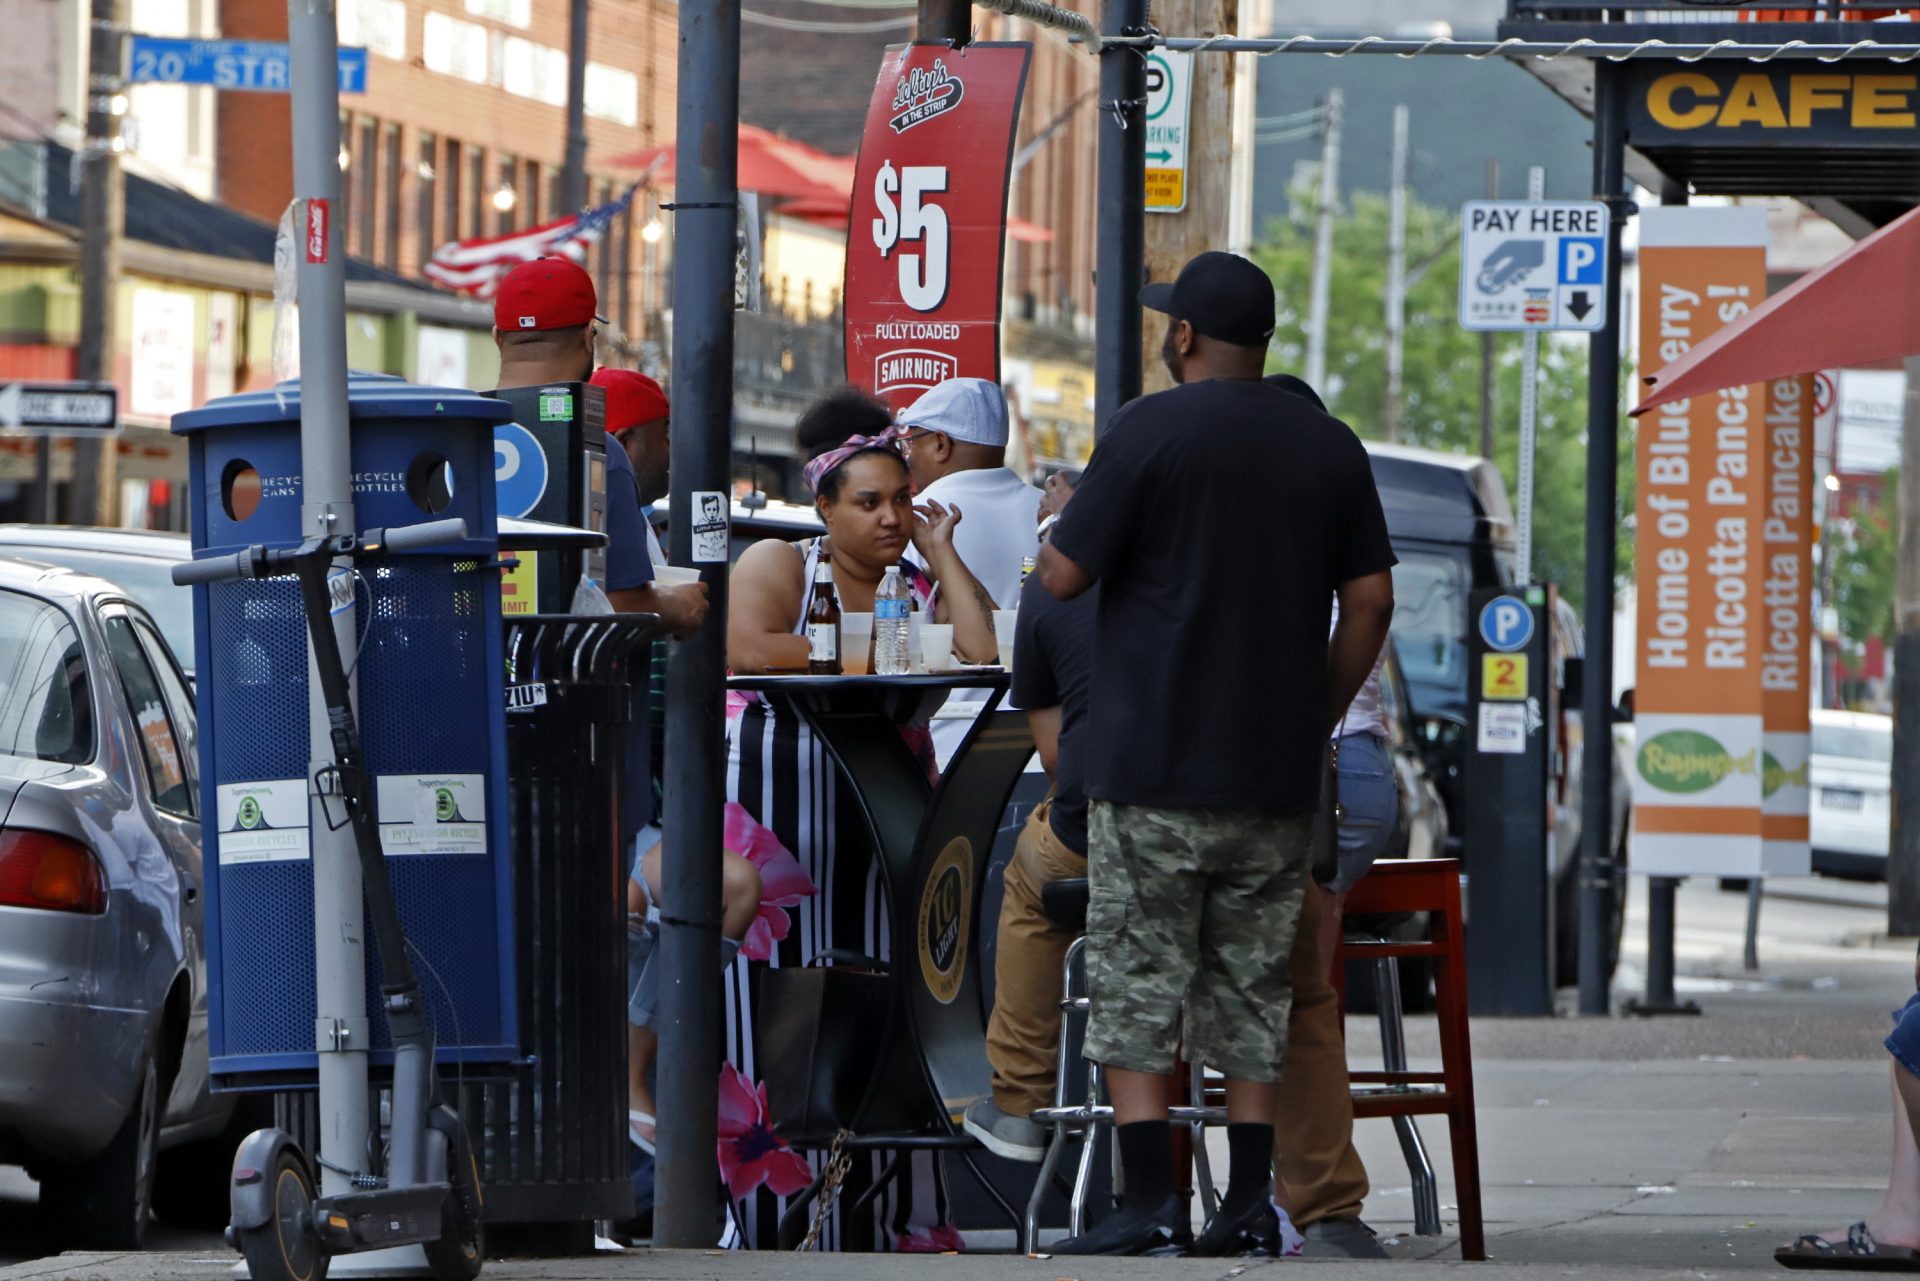 People gather at tables outside Lefty's bar in the Strip District of downtown Pittsburgh Sunday, June 28, 2020.